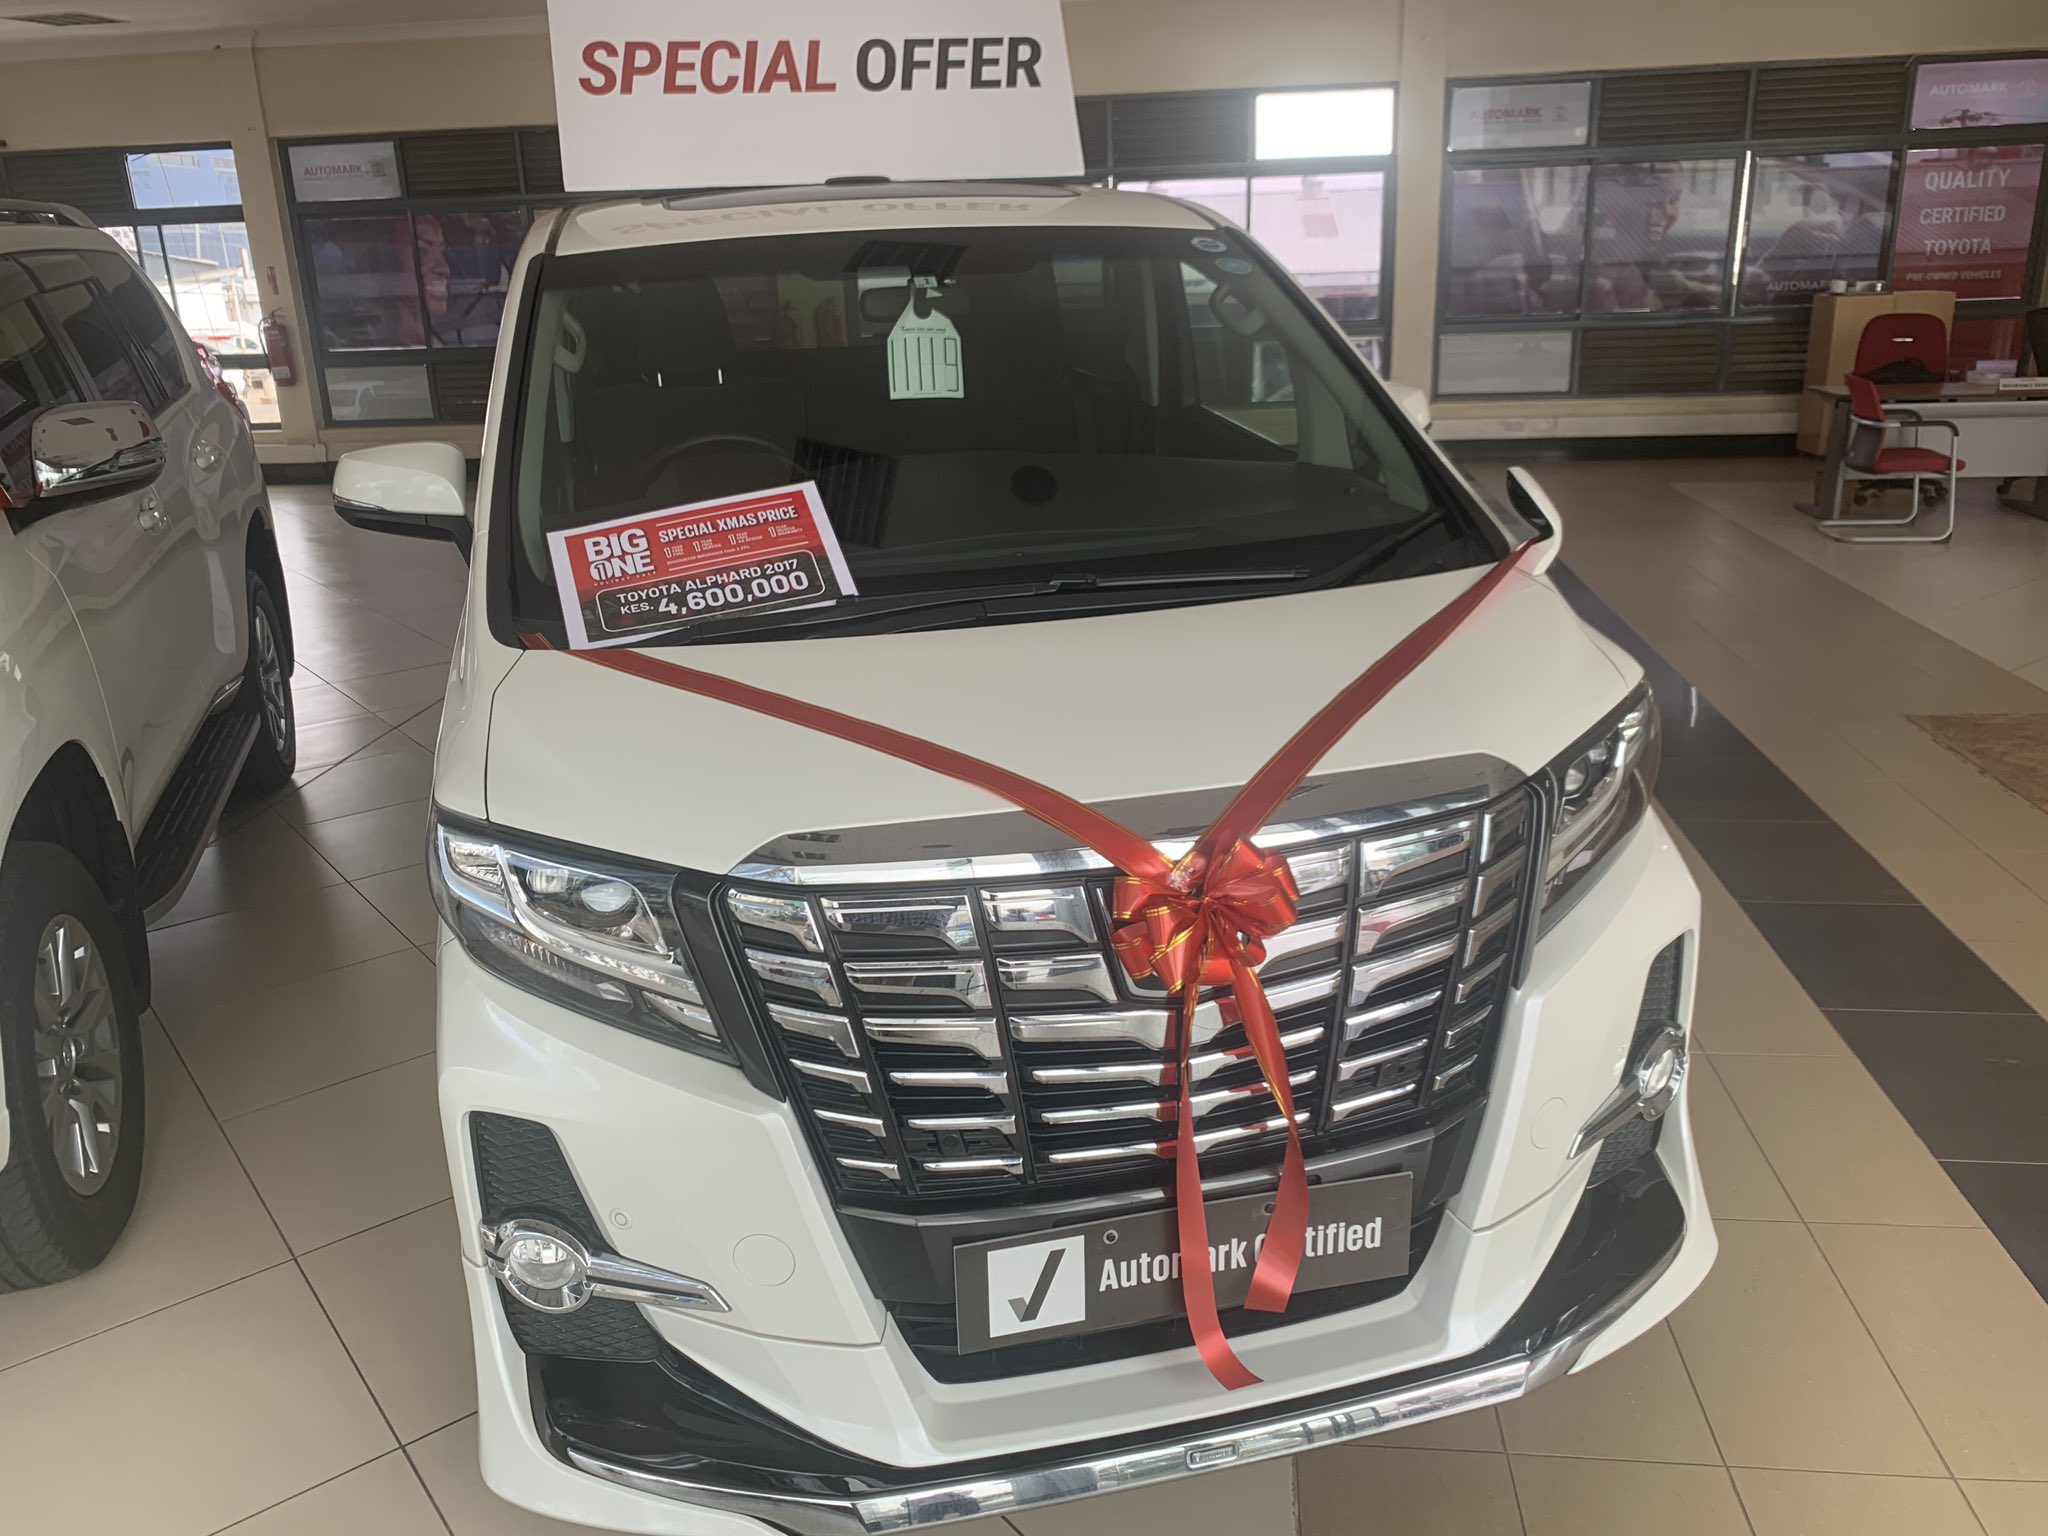 Ahmed Mohamed Asmali This Is Big One Special Xmas Price This Alphard 17 At Toyota Kenya Is 4 6m Fit For Families Luxury With Performance T Co P0oroo2zdh